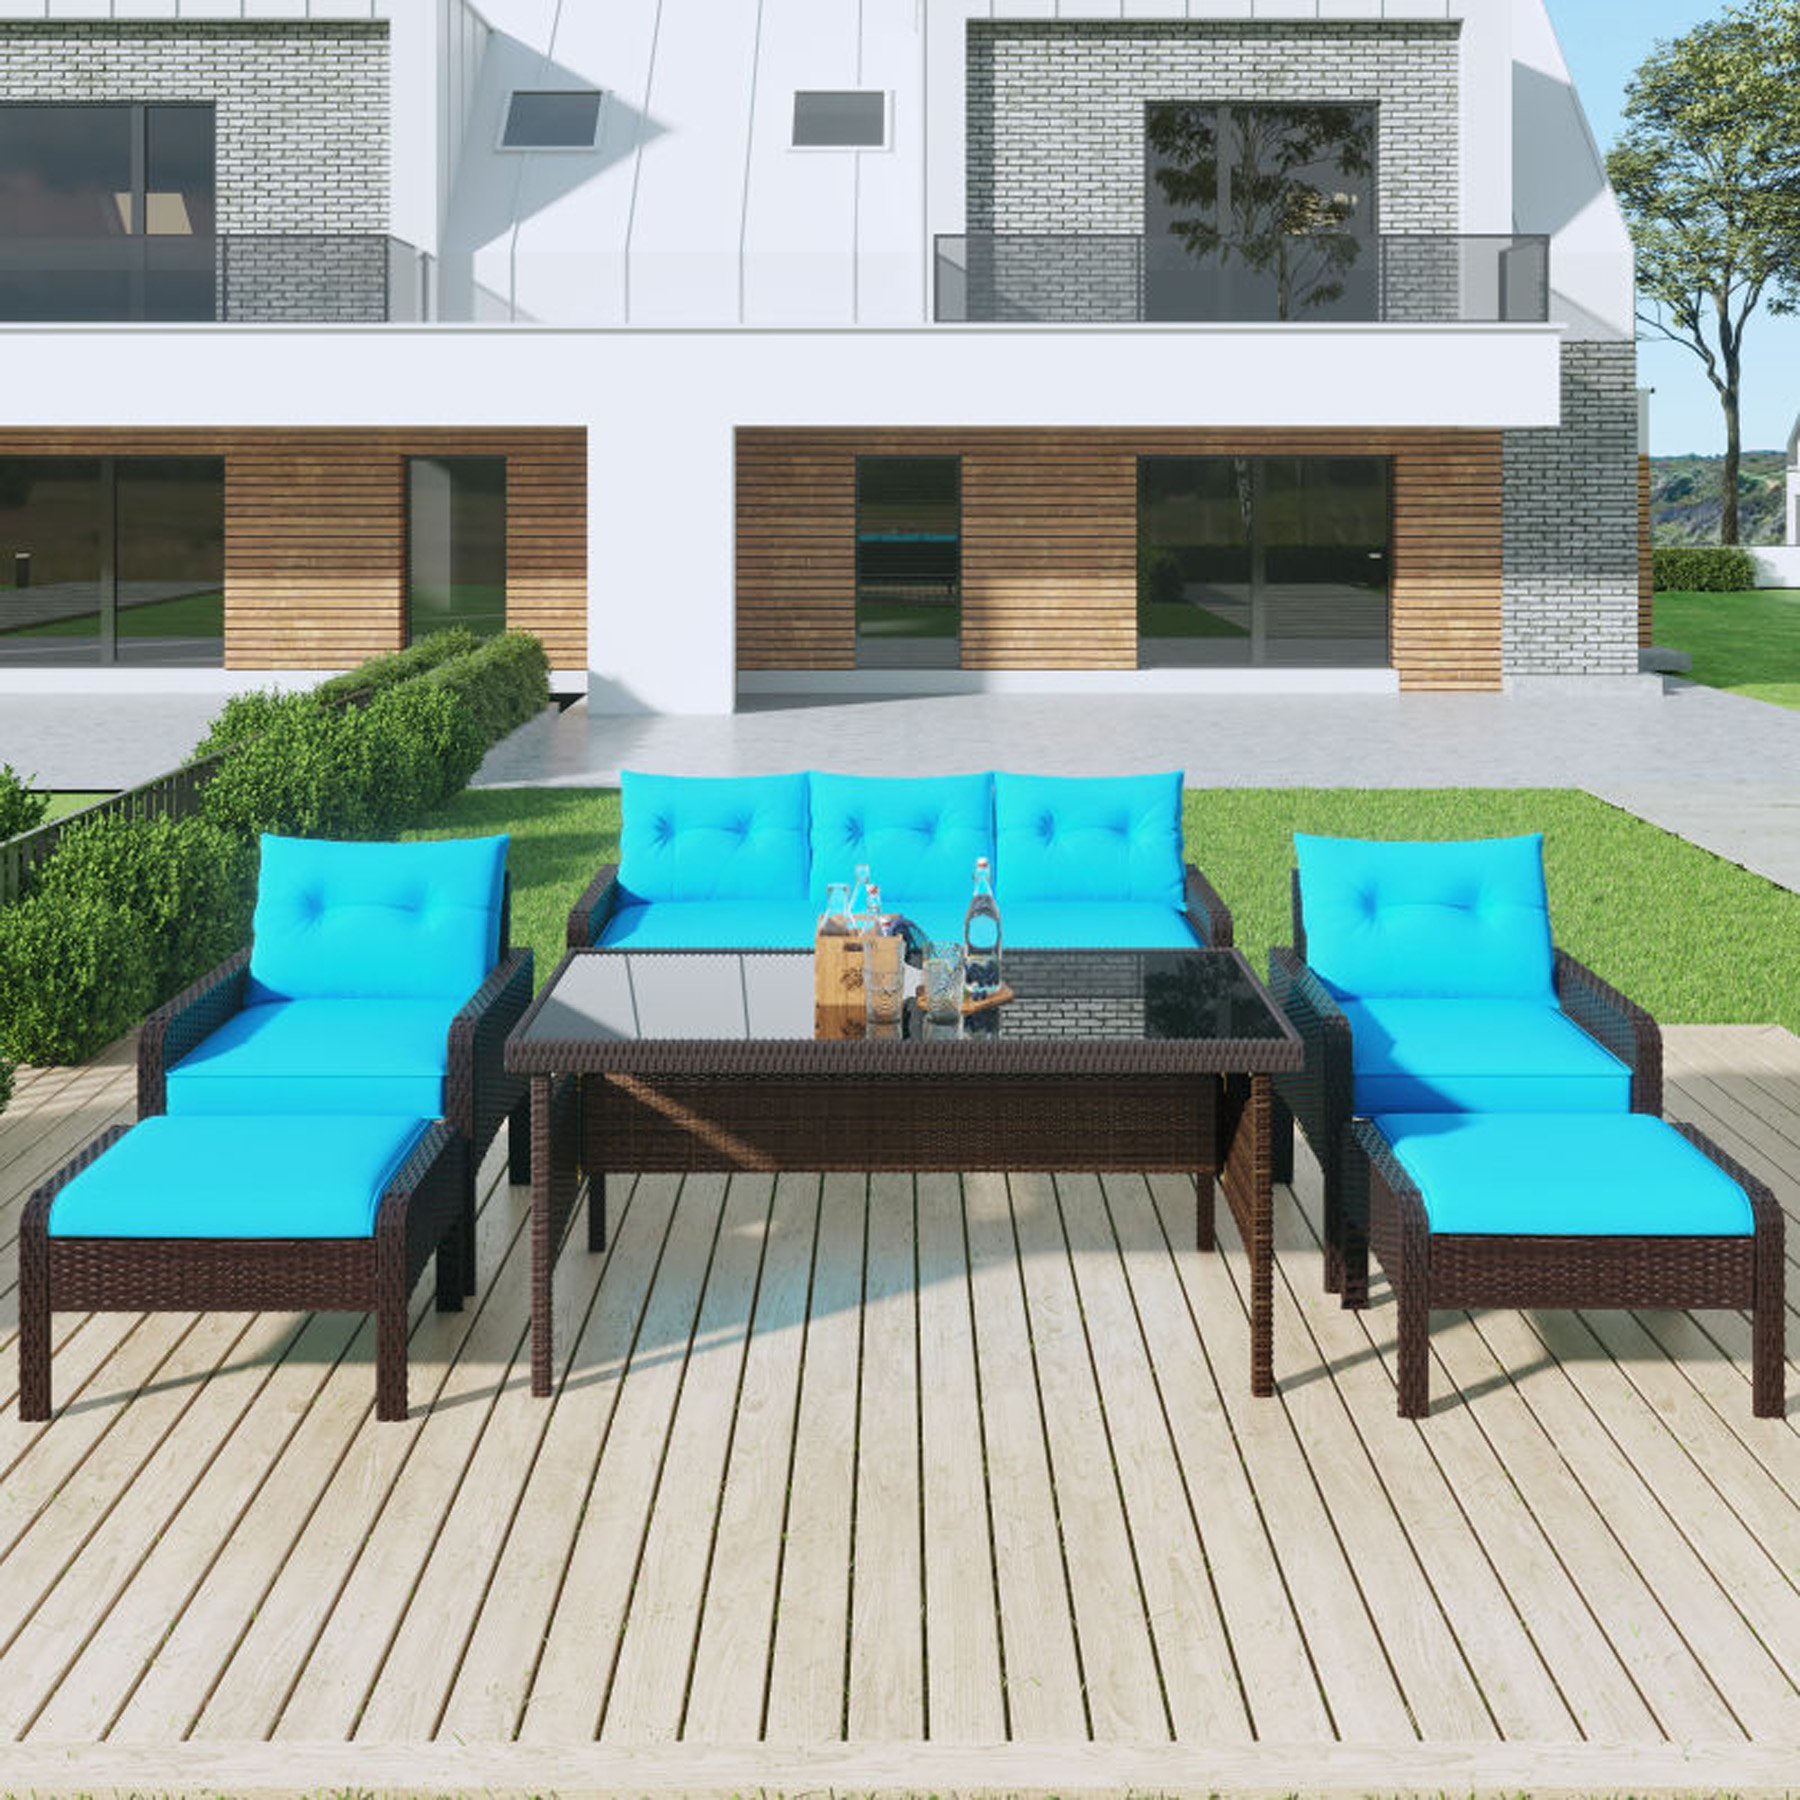 6 Pieces Patio Furniture Sets, Outdoor Lounge Chair Set Conversation Set with Glass Coffee Table, Sofa and Ottoman, Outdoor Table and Chairs for Porch Lawn Garden Backyard, Brown, LJ3711 - image 1 of 10